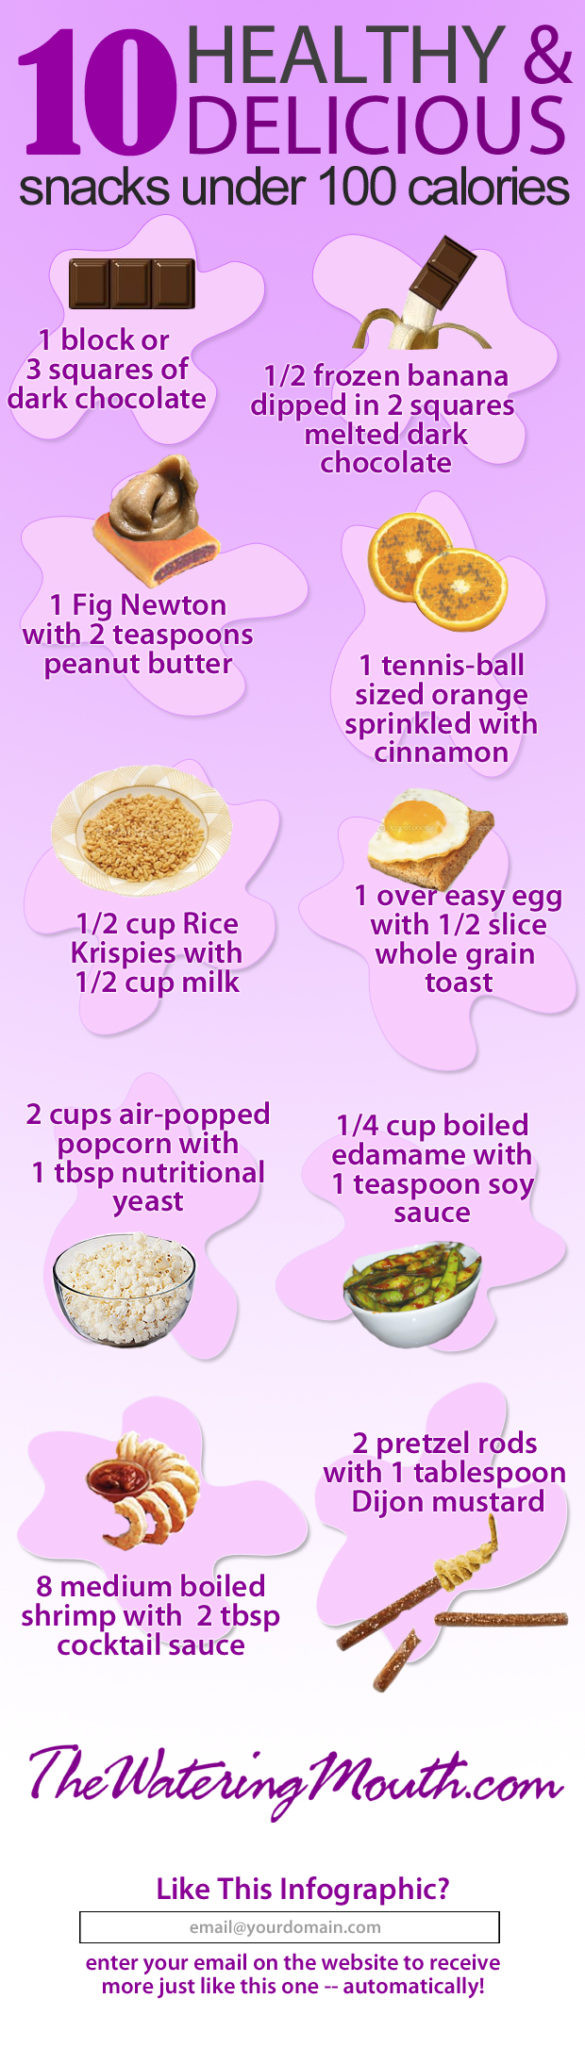 100 Calorie Healthy Snacks
 10 Healthy Snacks Under 100 Calories [ infographic] The